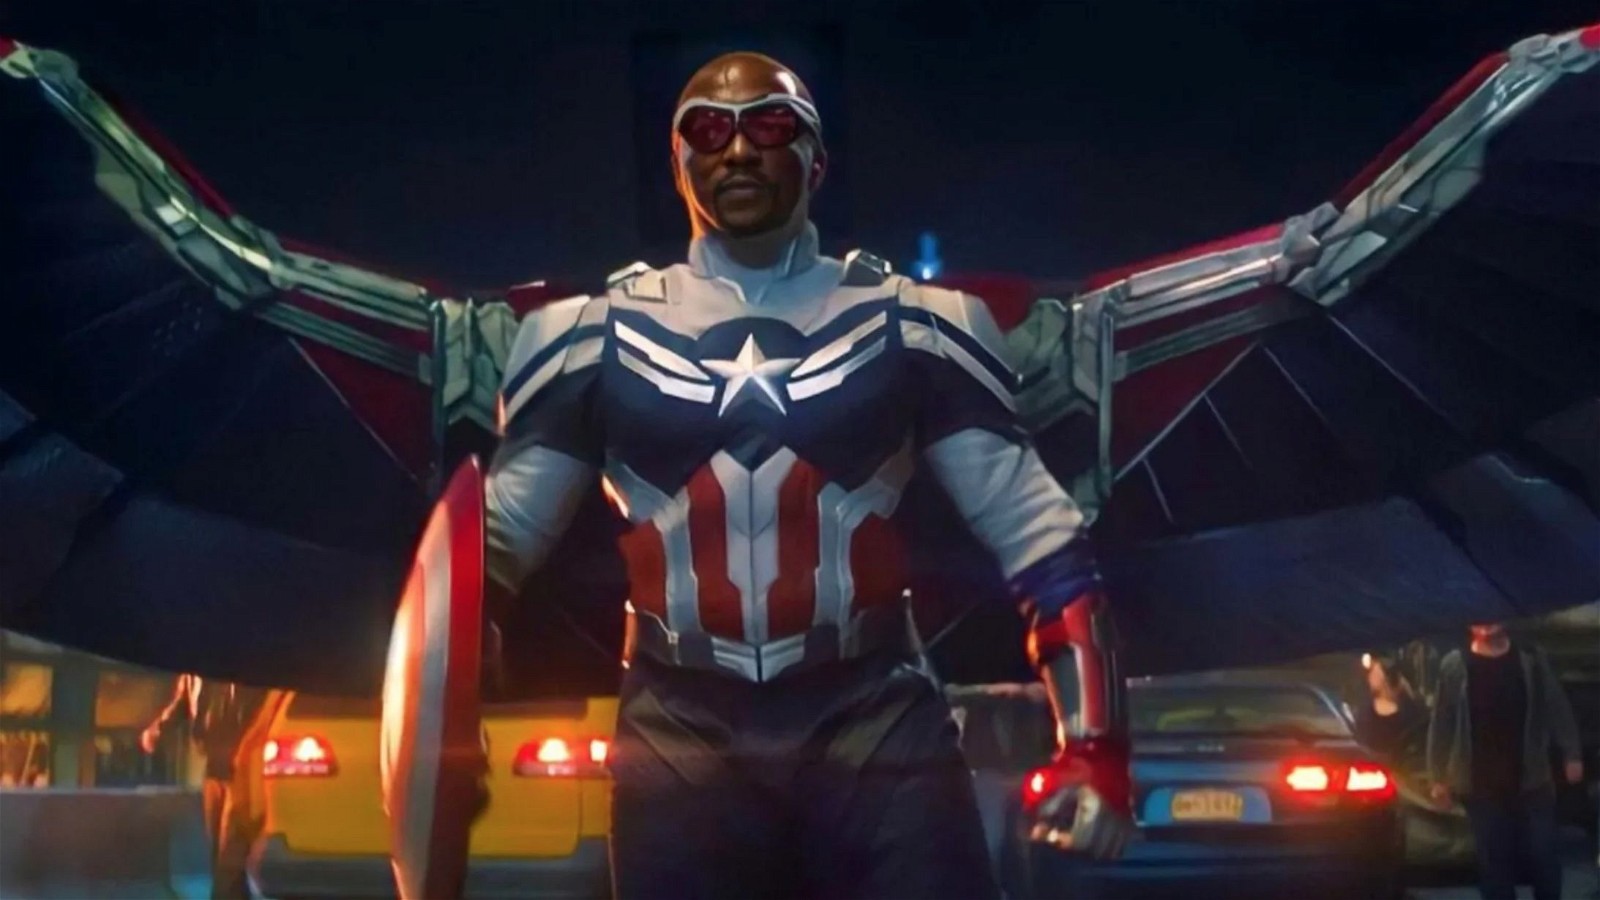 New image from the sets of Captain America: New World order shared by Anthony Mackie